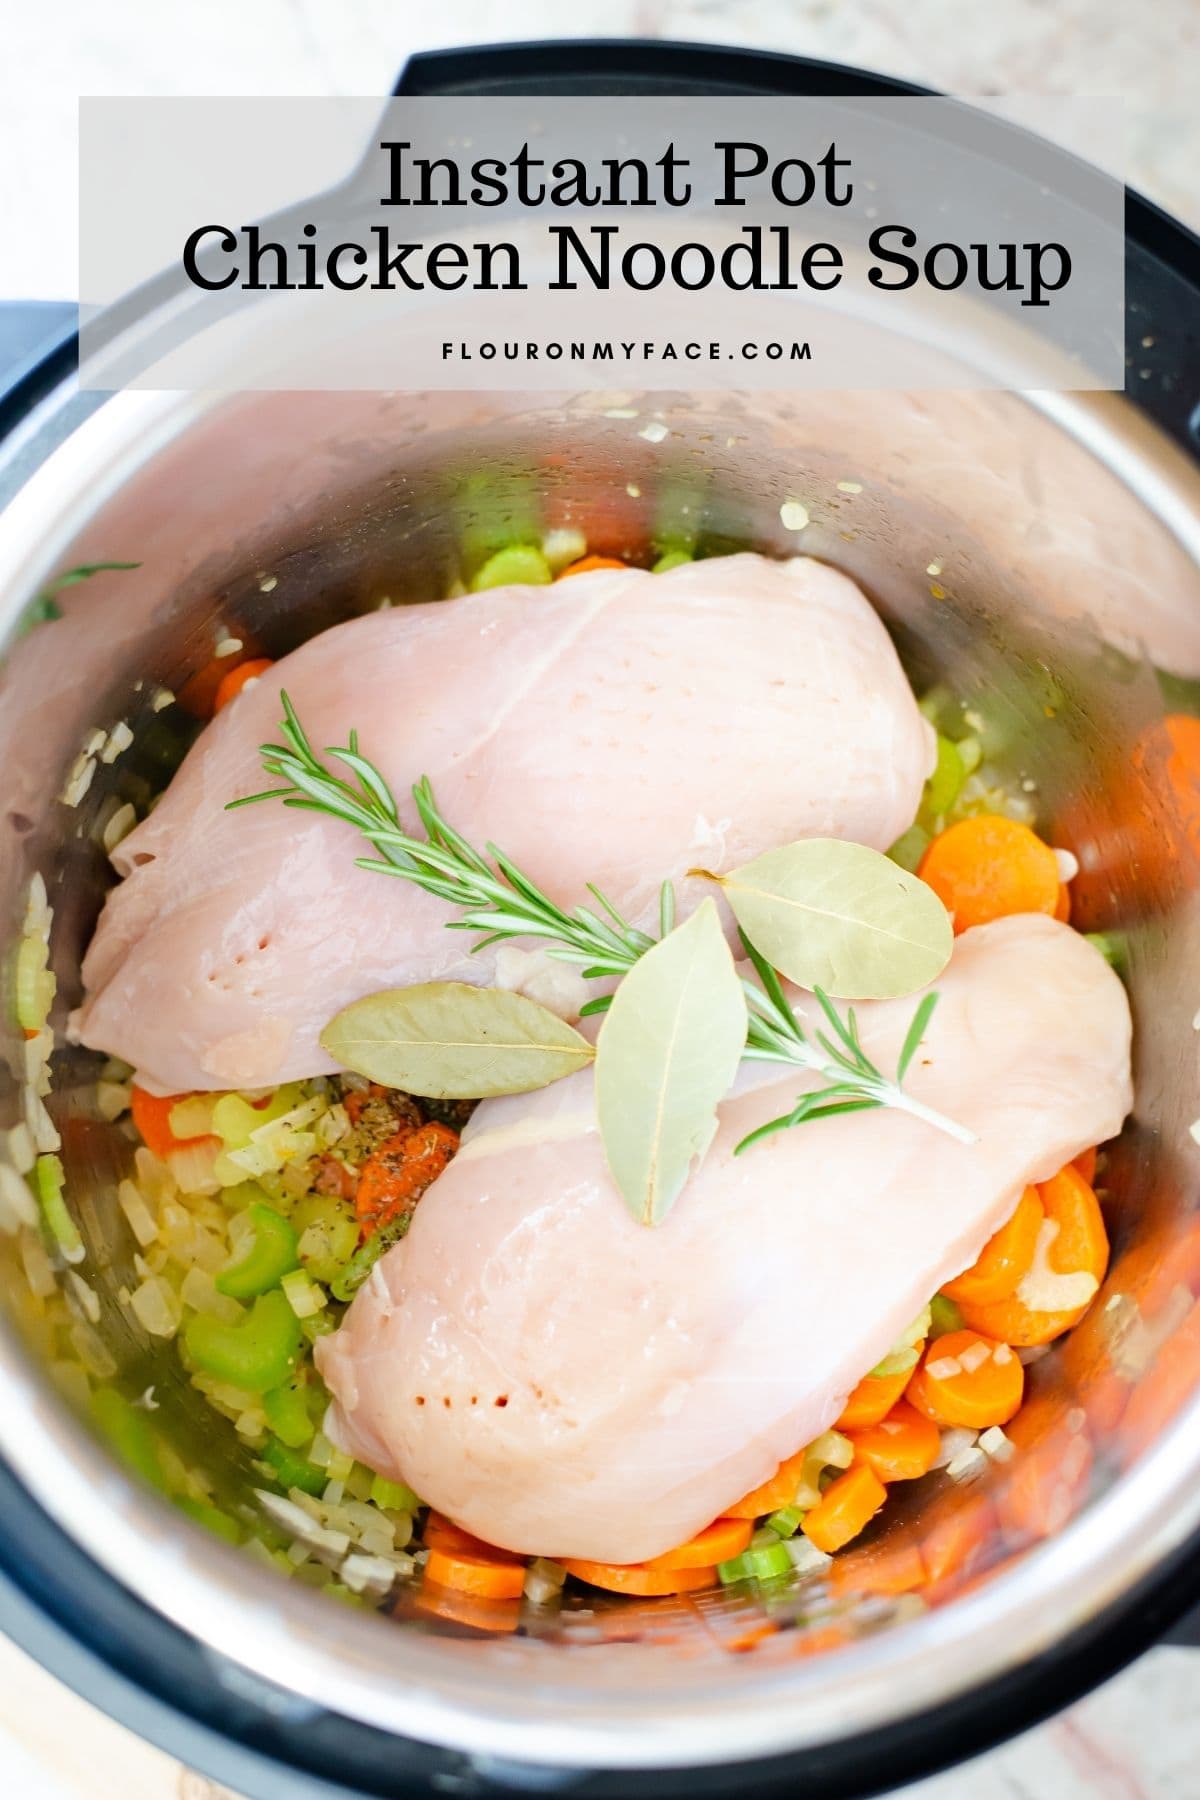 Image looking down into a Instant Pot filled with ingredients to make chicken noodle soup before pressure cooking.